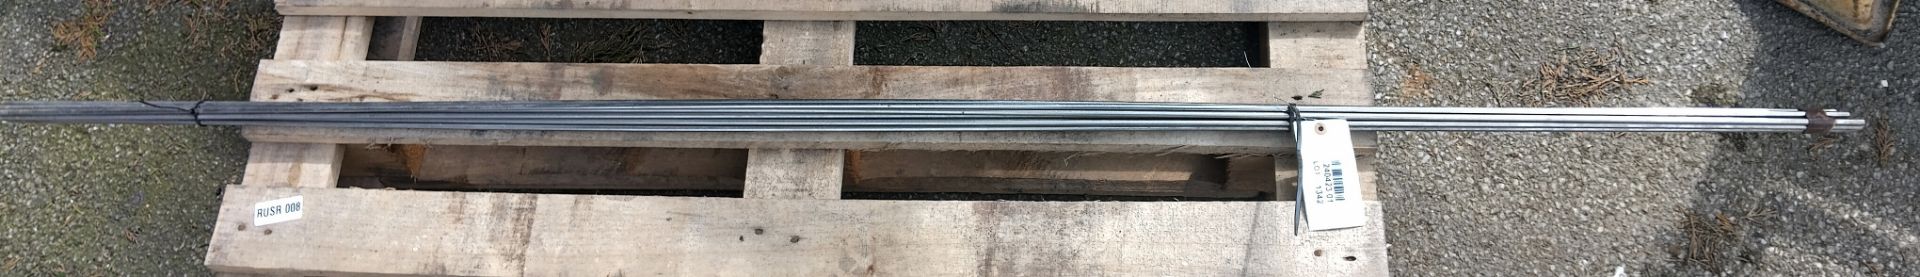 12x stainless steel bars - L 1920 x D 5mm